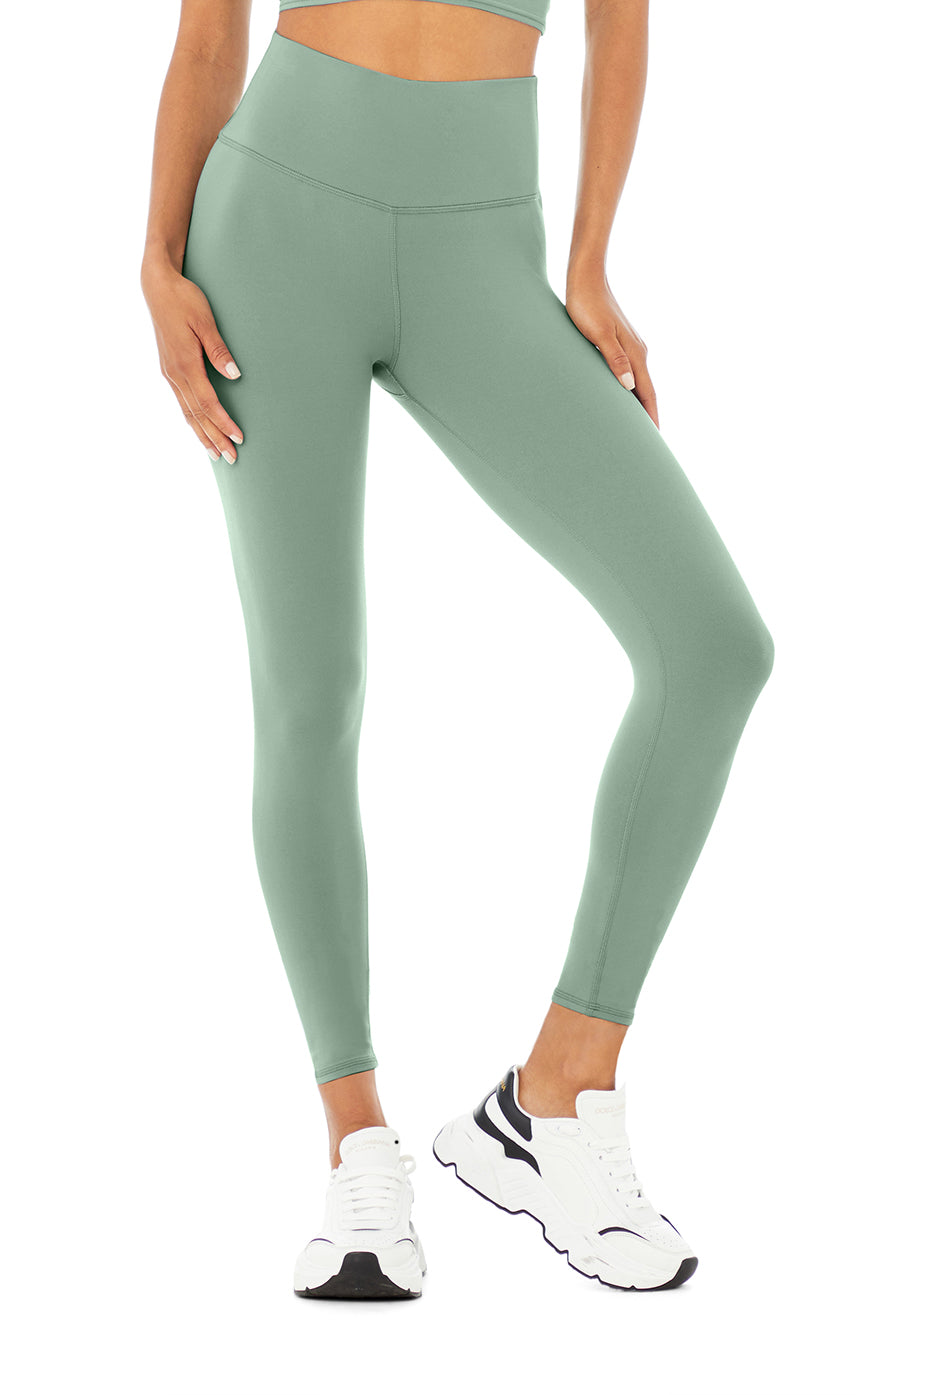 7/8 High-Waist Airbrush Legging in Soft Seagrass by Alo Yoga - Work Well  Daily